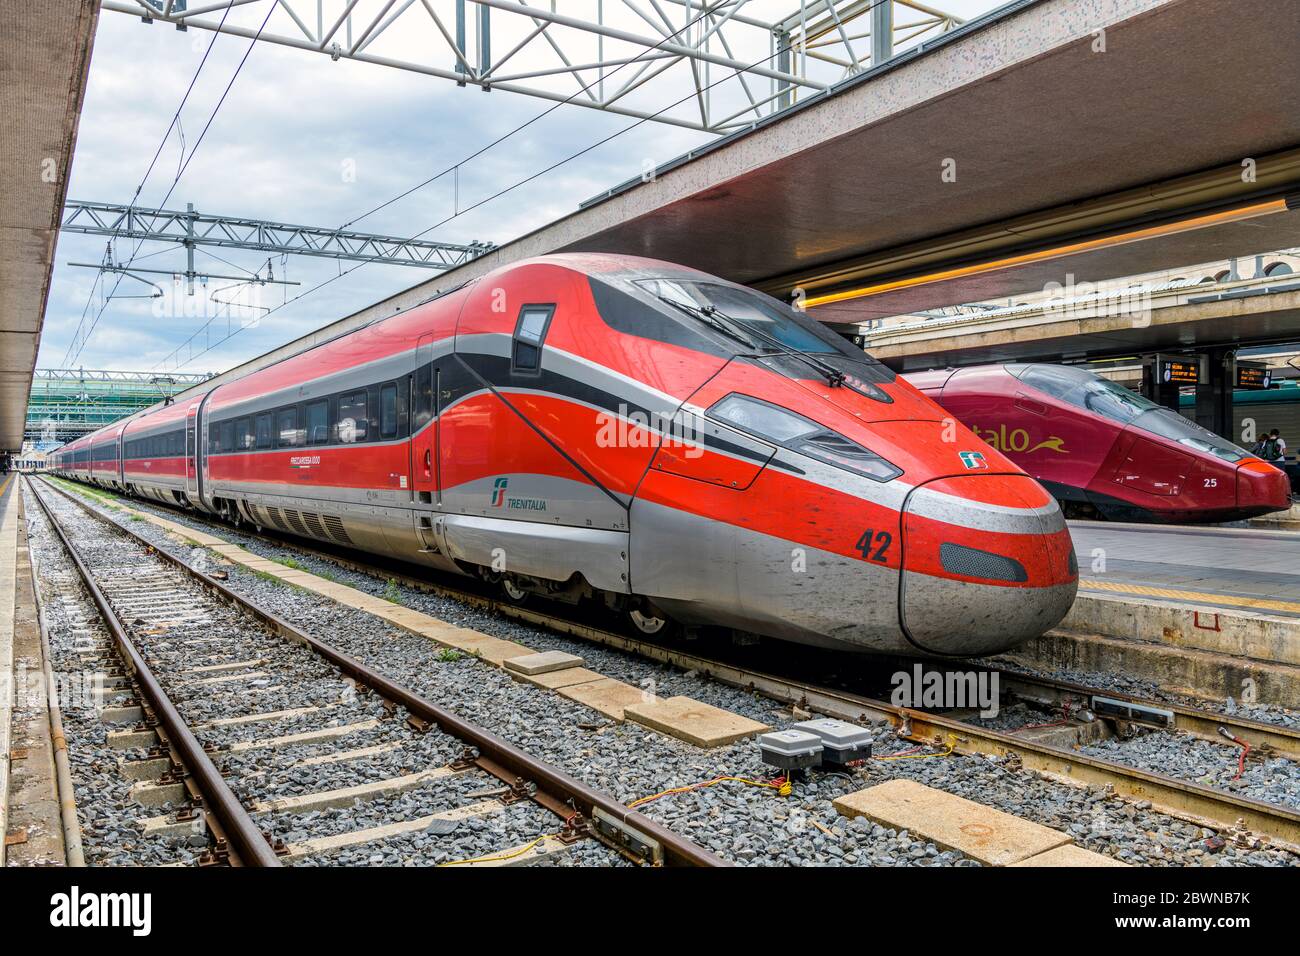 Red Bullet Train - A red high-speed electric train, Frecciarossa 1000 of Trenitalia, parking at a platform in Rome Termini Train Station. Rome, Italy. Stock Photo